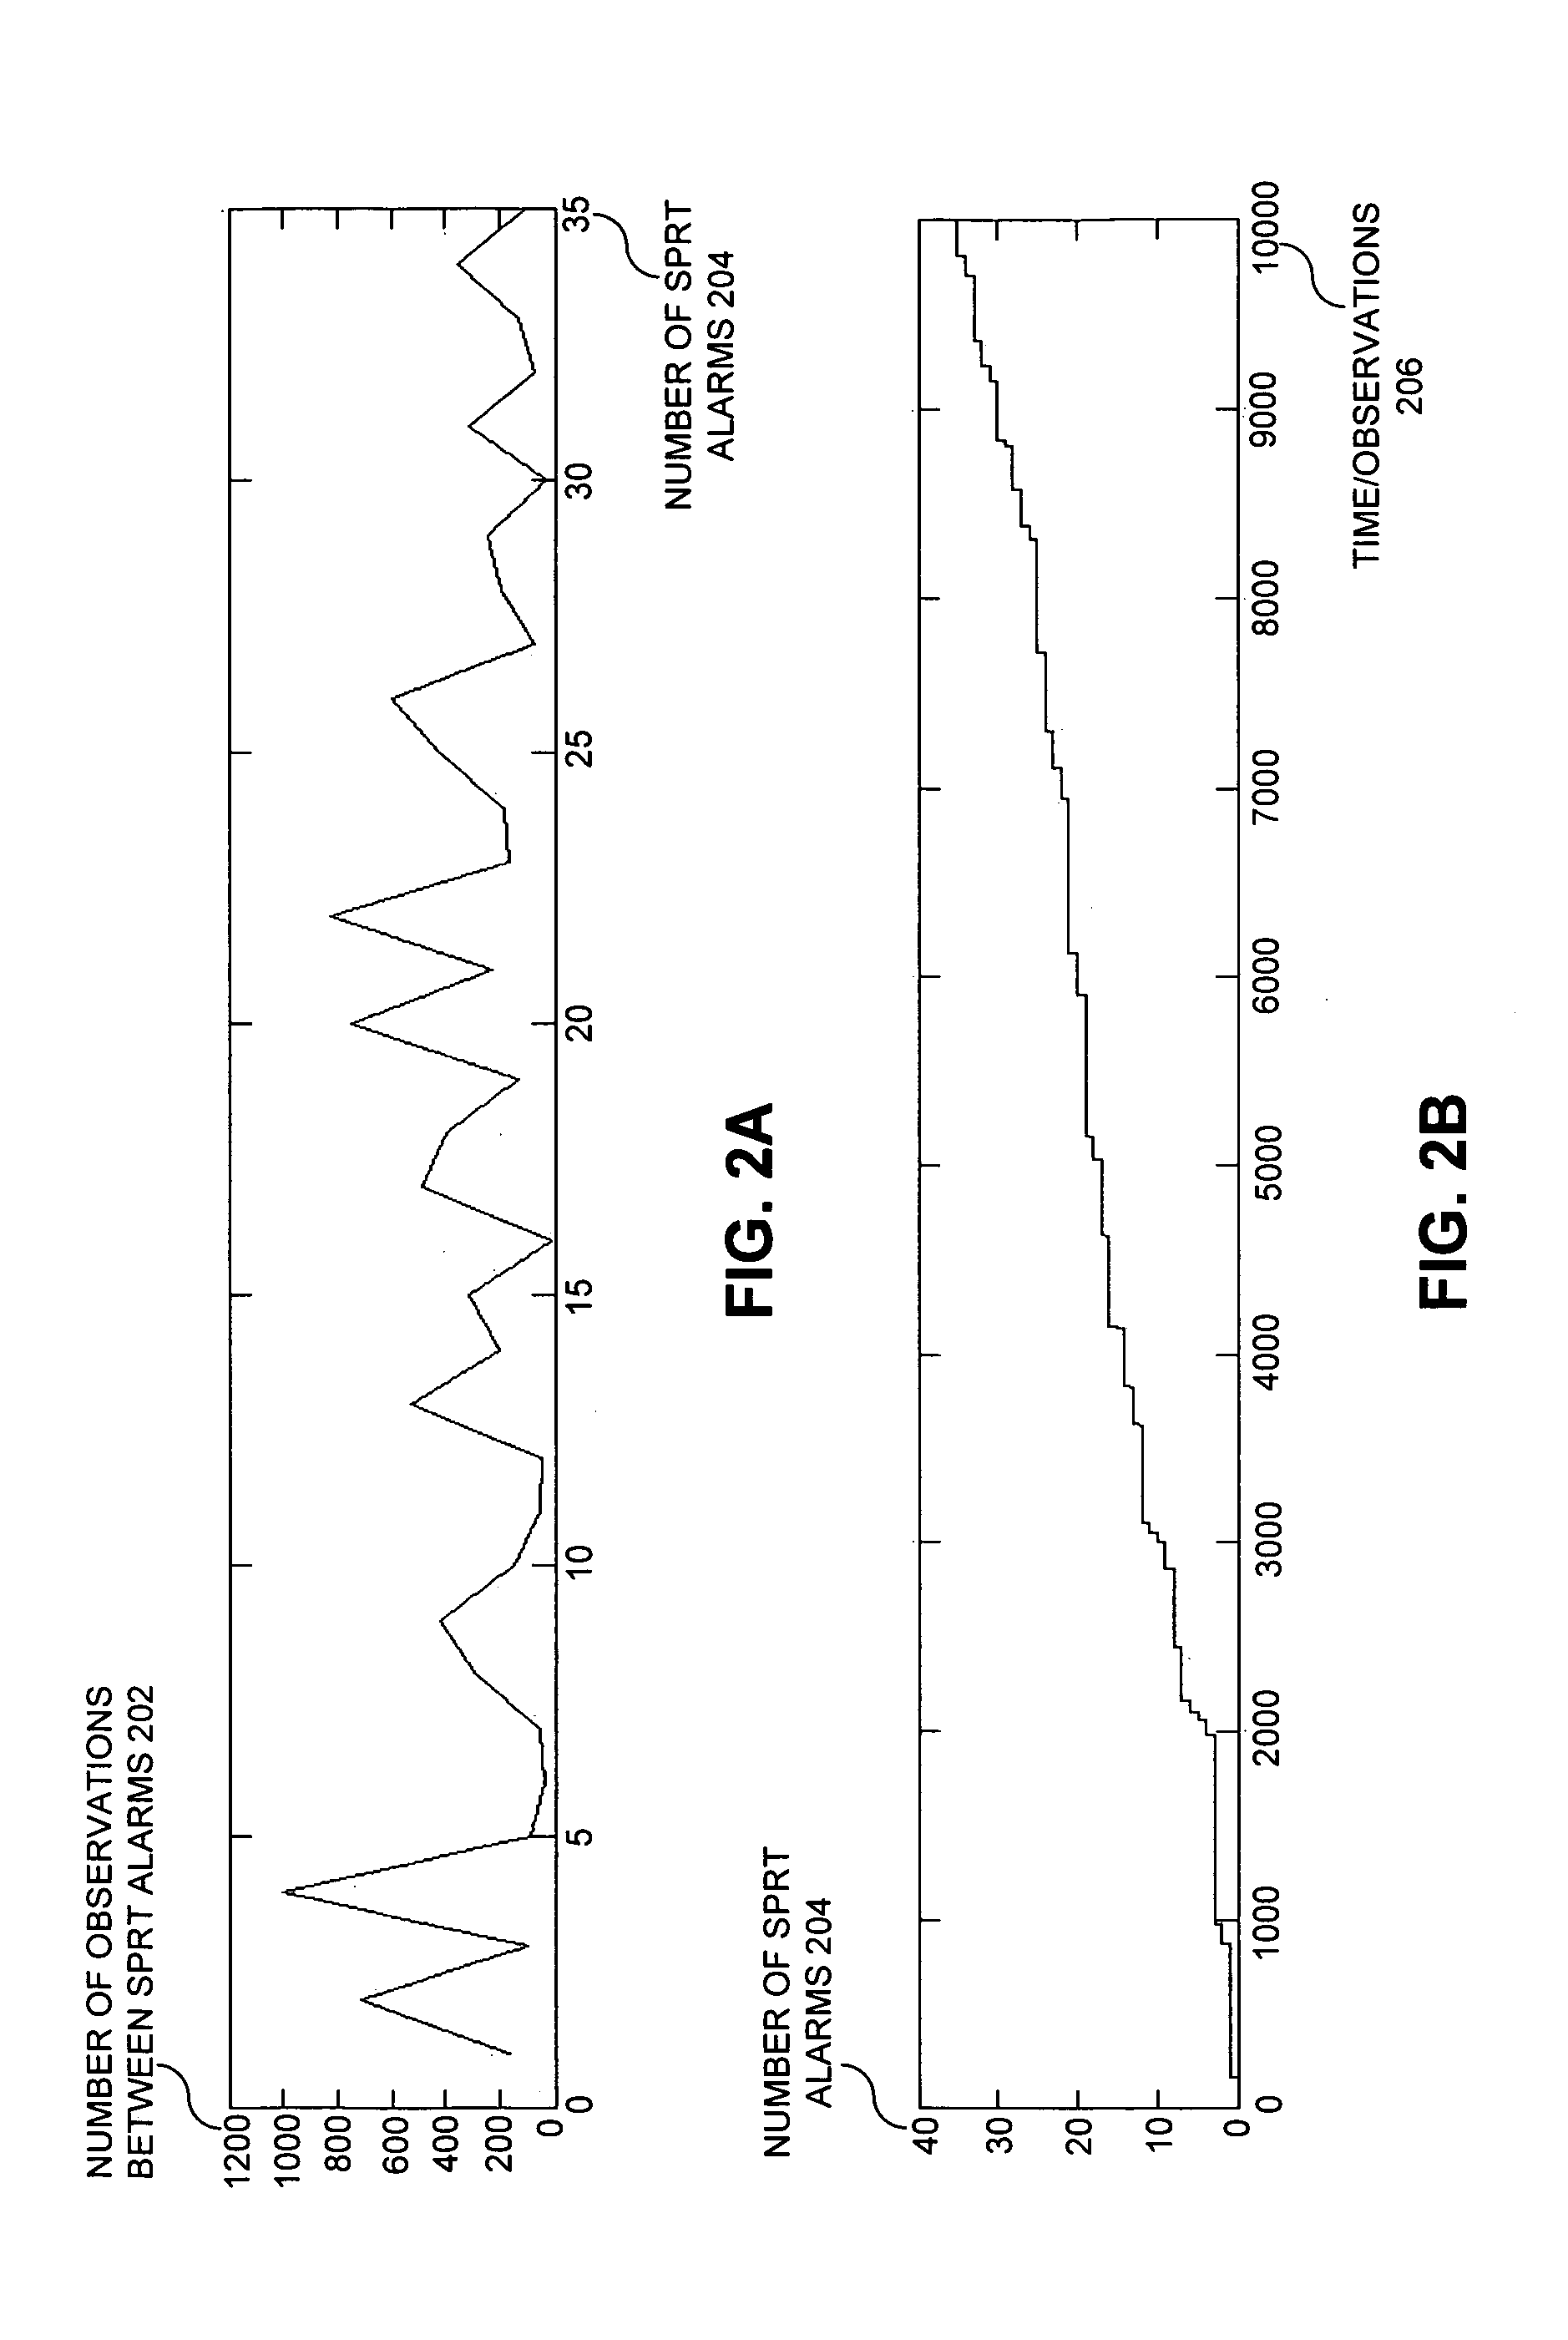 Method and apparatus for quantitatively determining severity of degradation in a signal